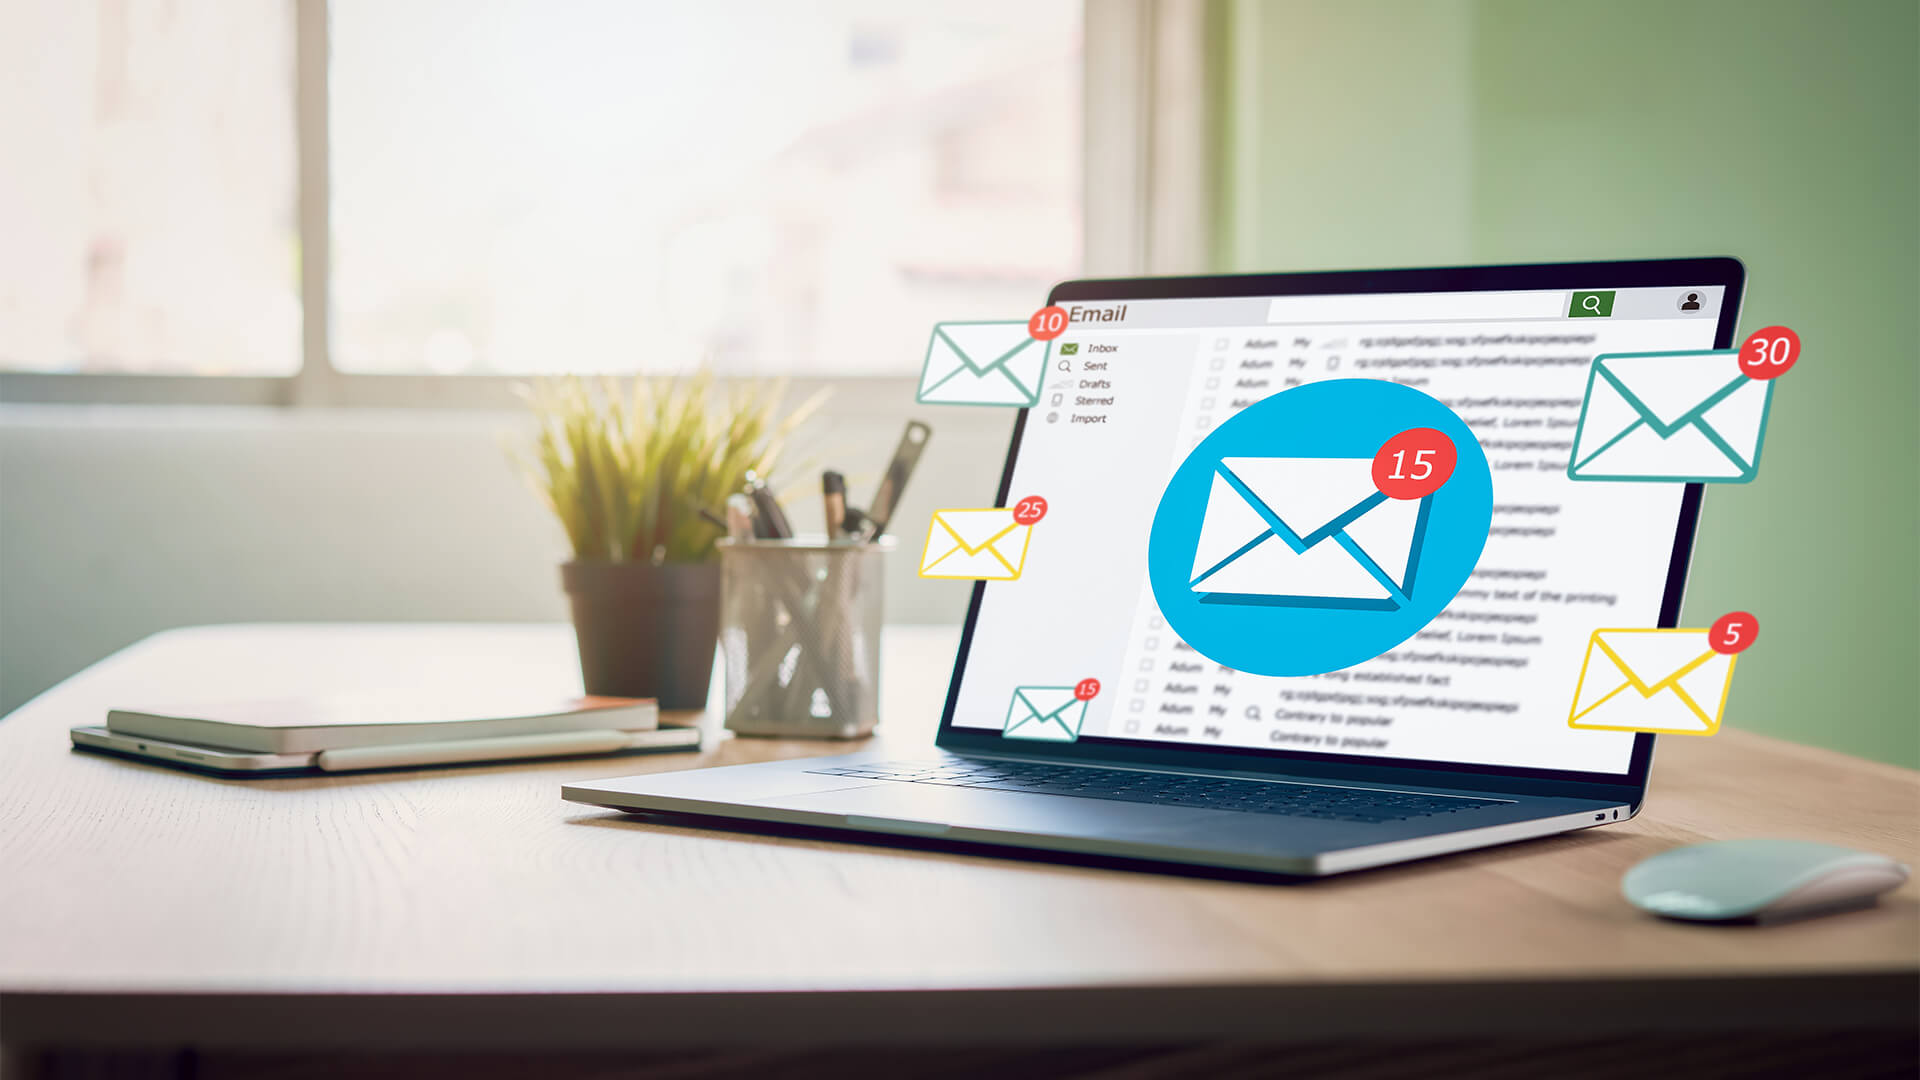 email signatures can be used to boost digital marketing